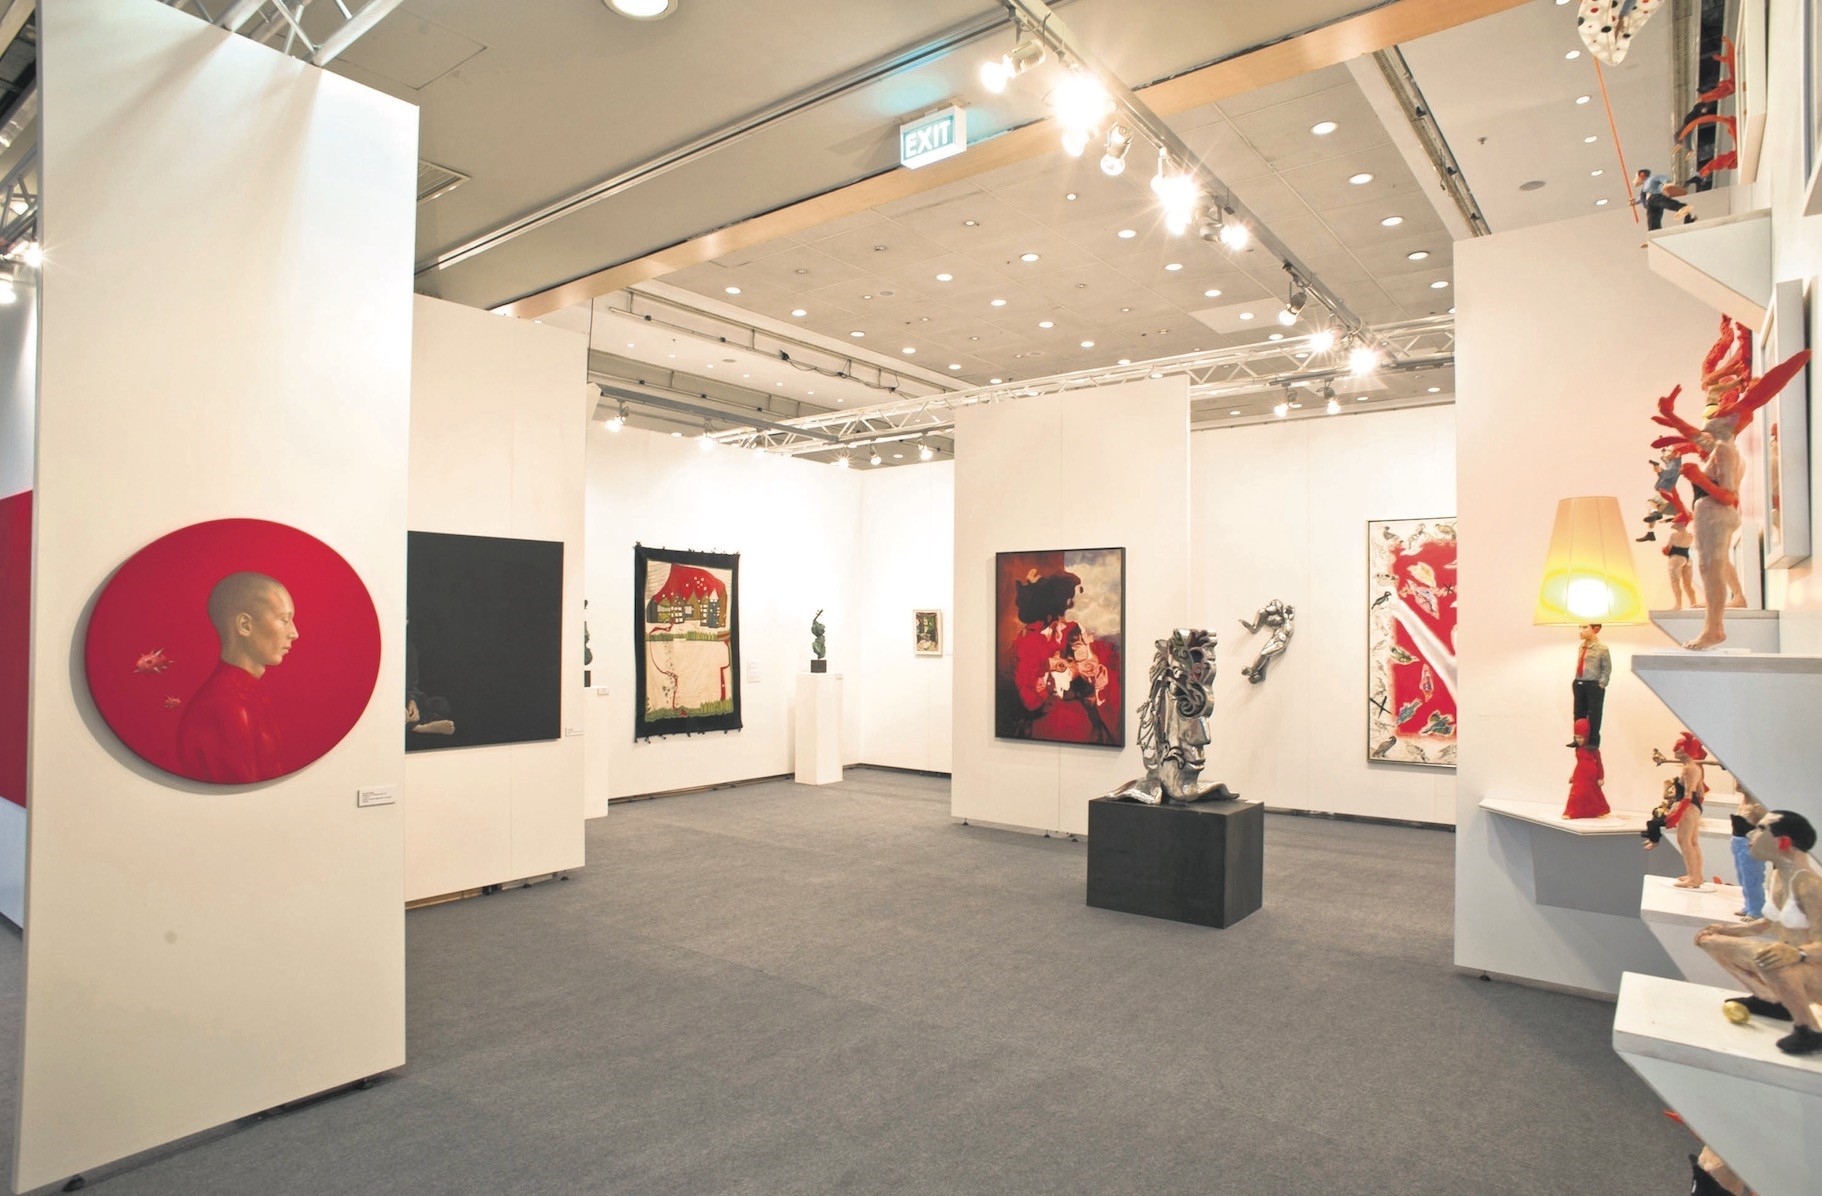 A scene from last yearu2019s Contemporary Istanbul art fair.